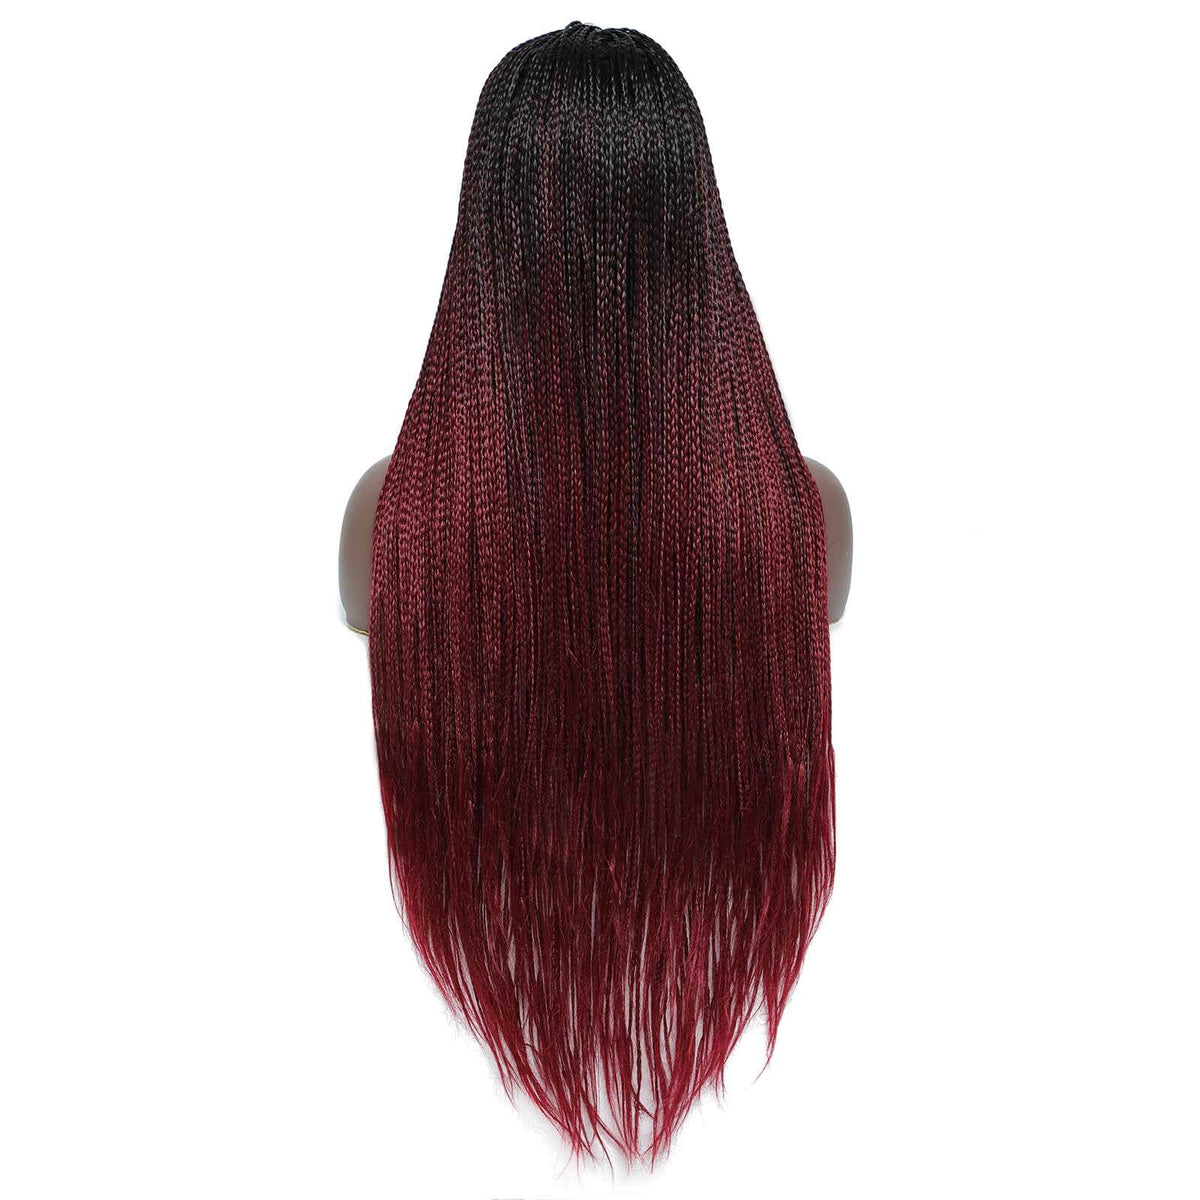 Headband Wigs Box Braided Wigs for Black Women Ombre Burgundy Red Color –  ROSEBONY